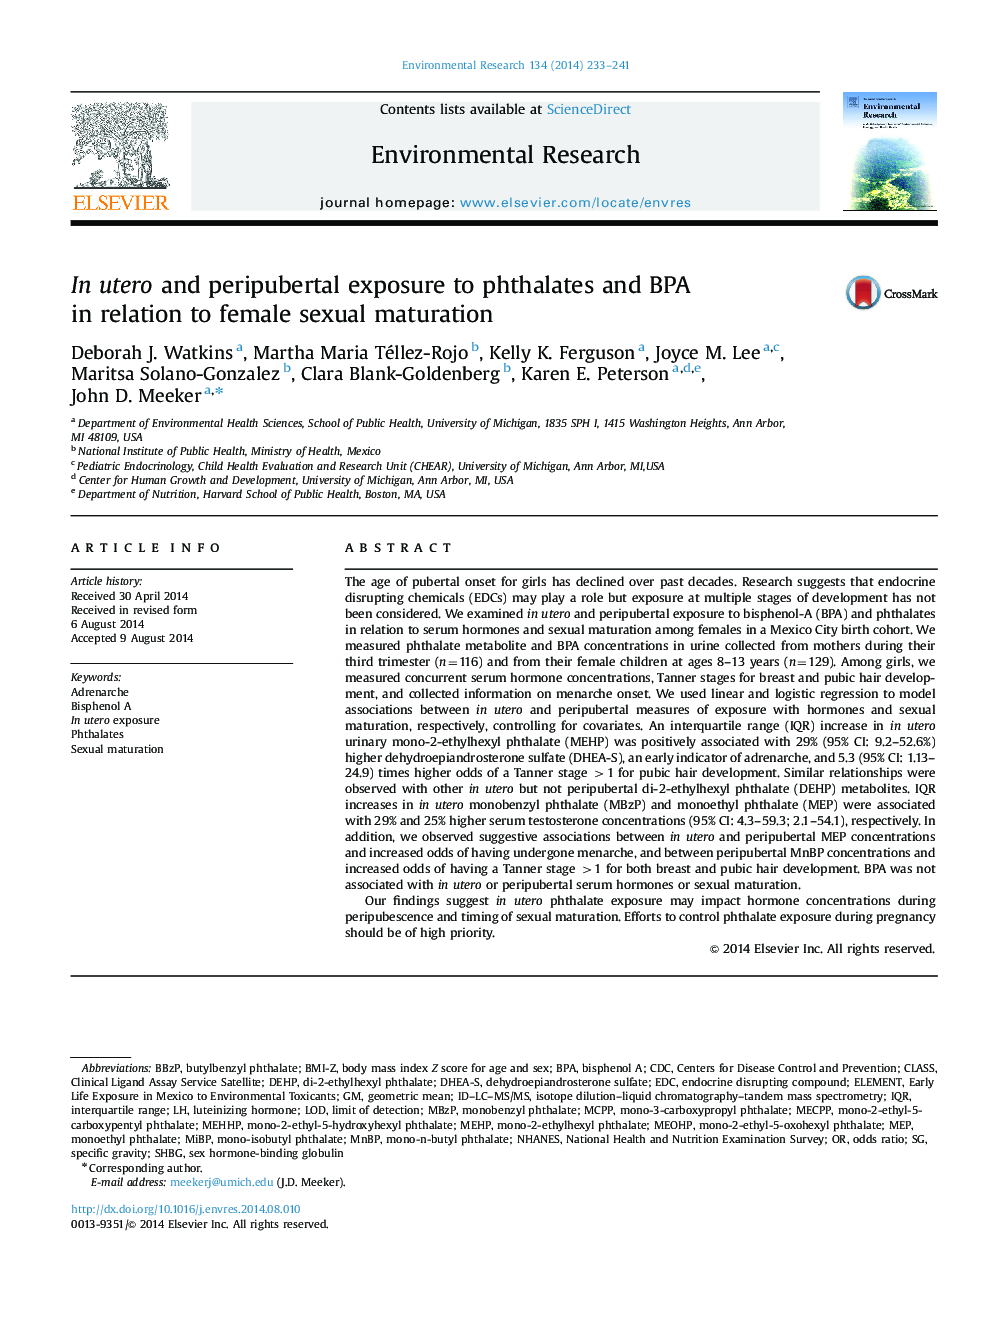 In utero and peripubertal exposure to phthalates and BPA in relation to female sexual maturation